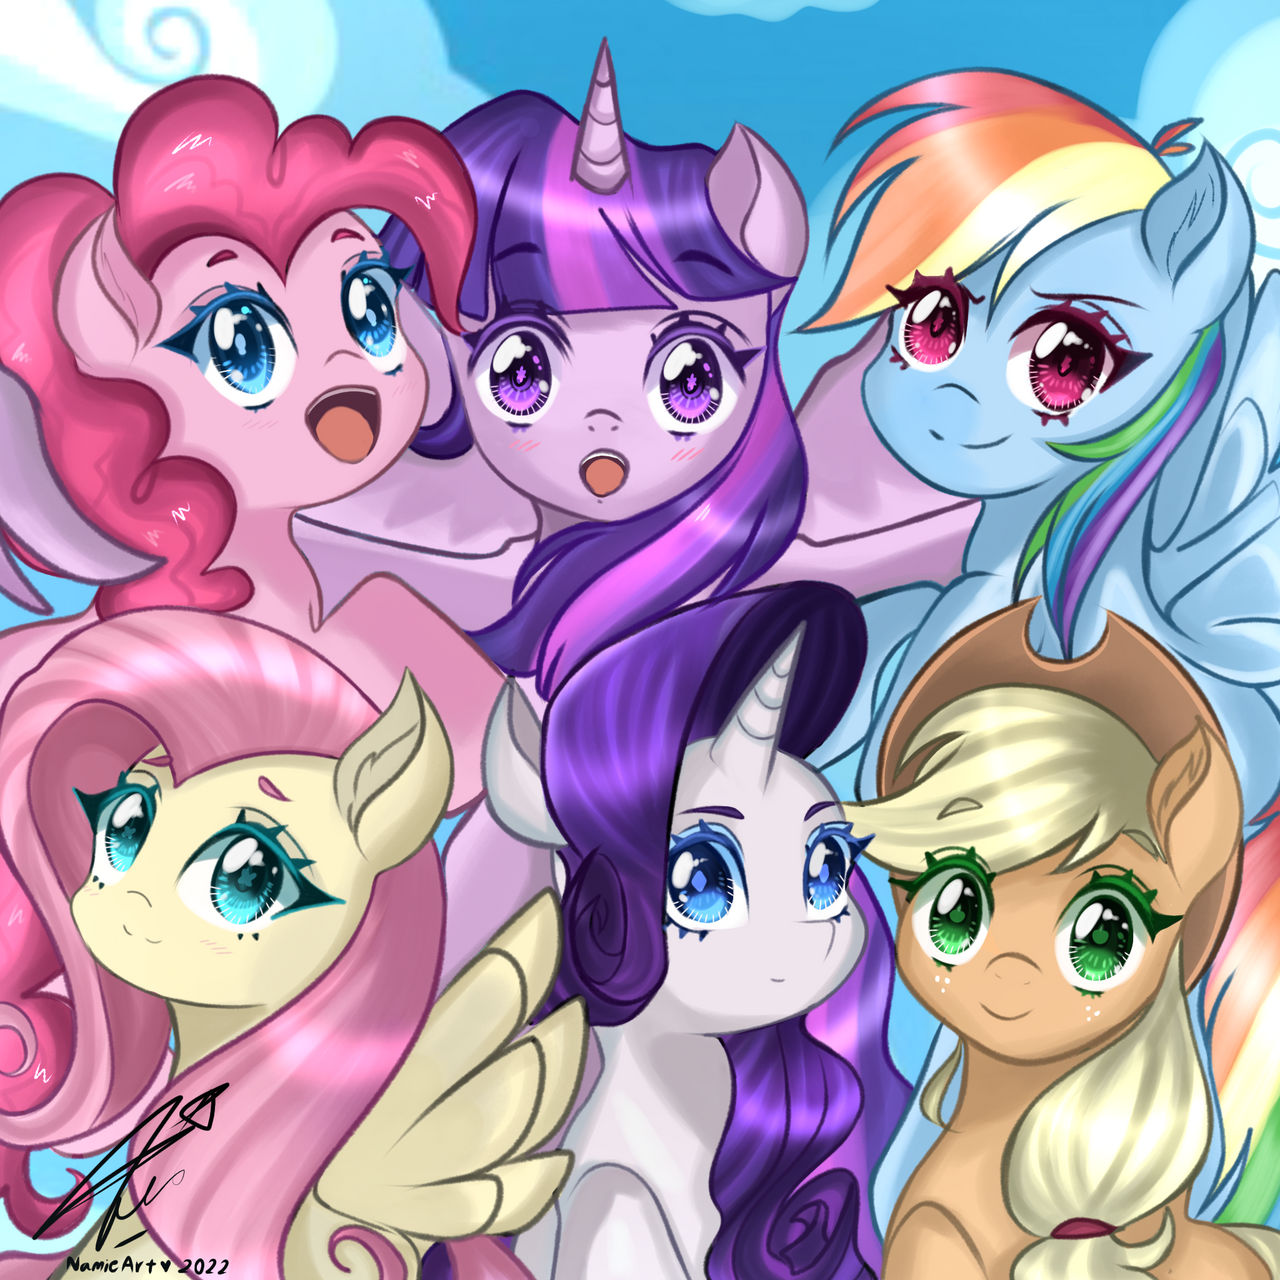 happy_12_anniversary_to_mlp___fim__by_namieart_dff7wi8-fullview.jpg